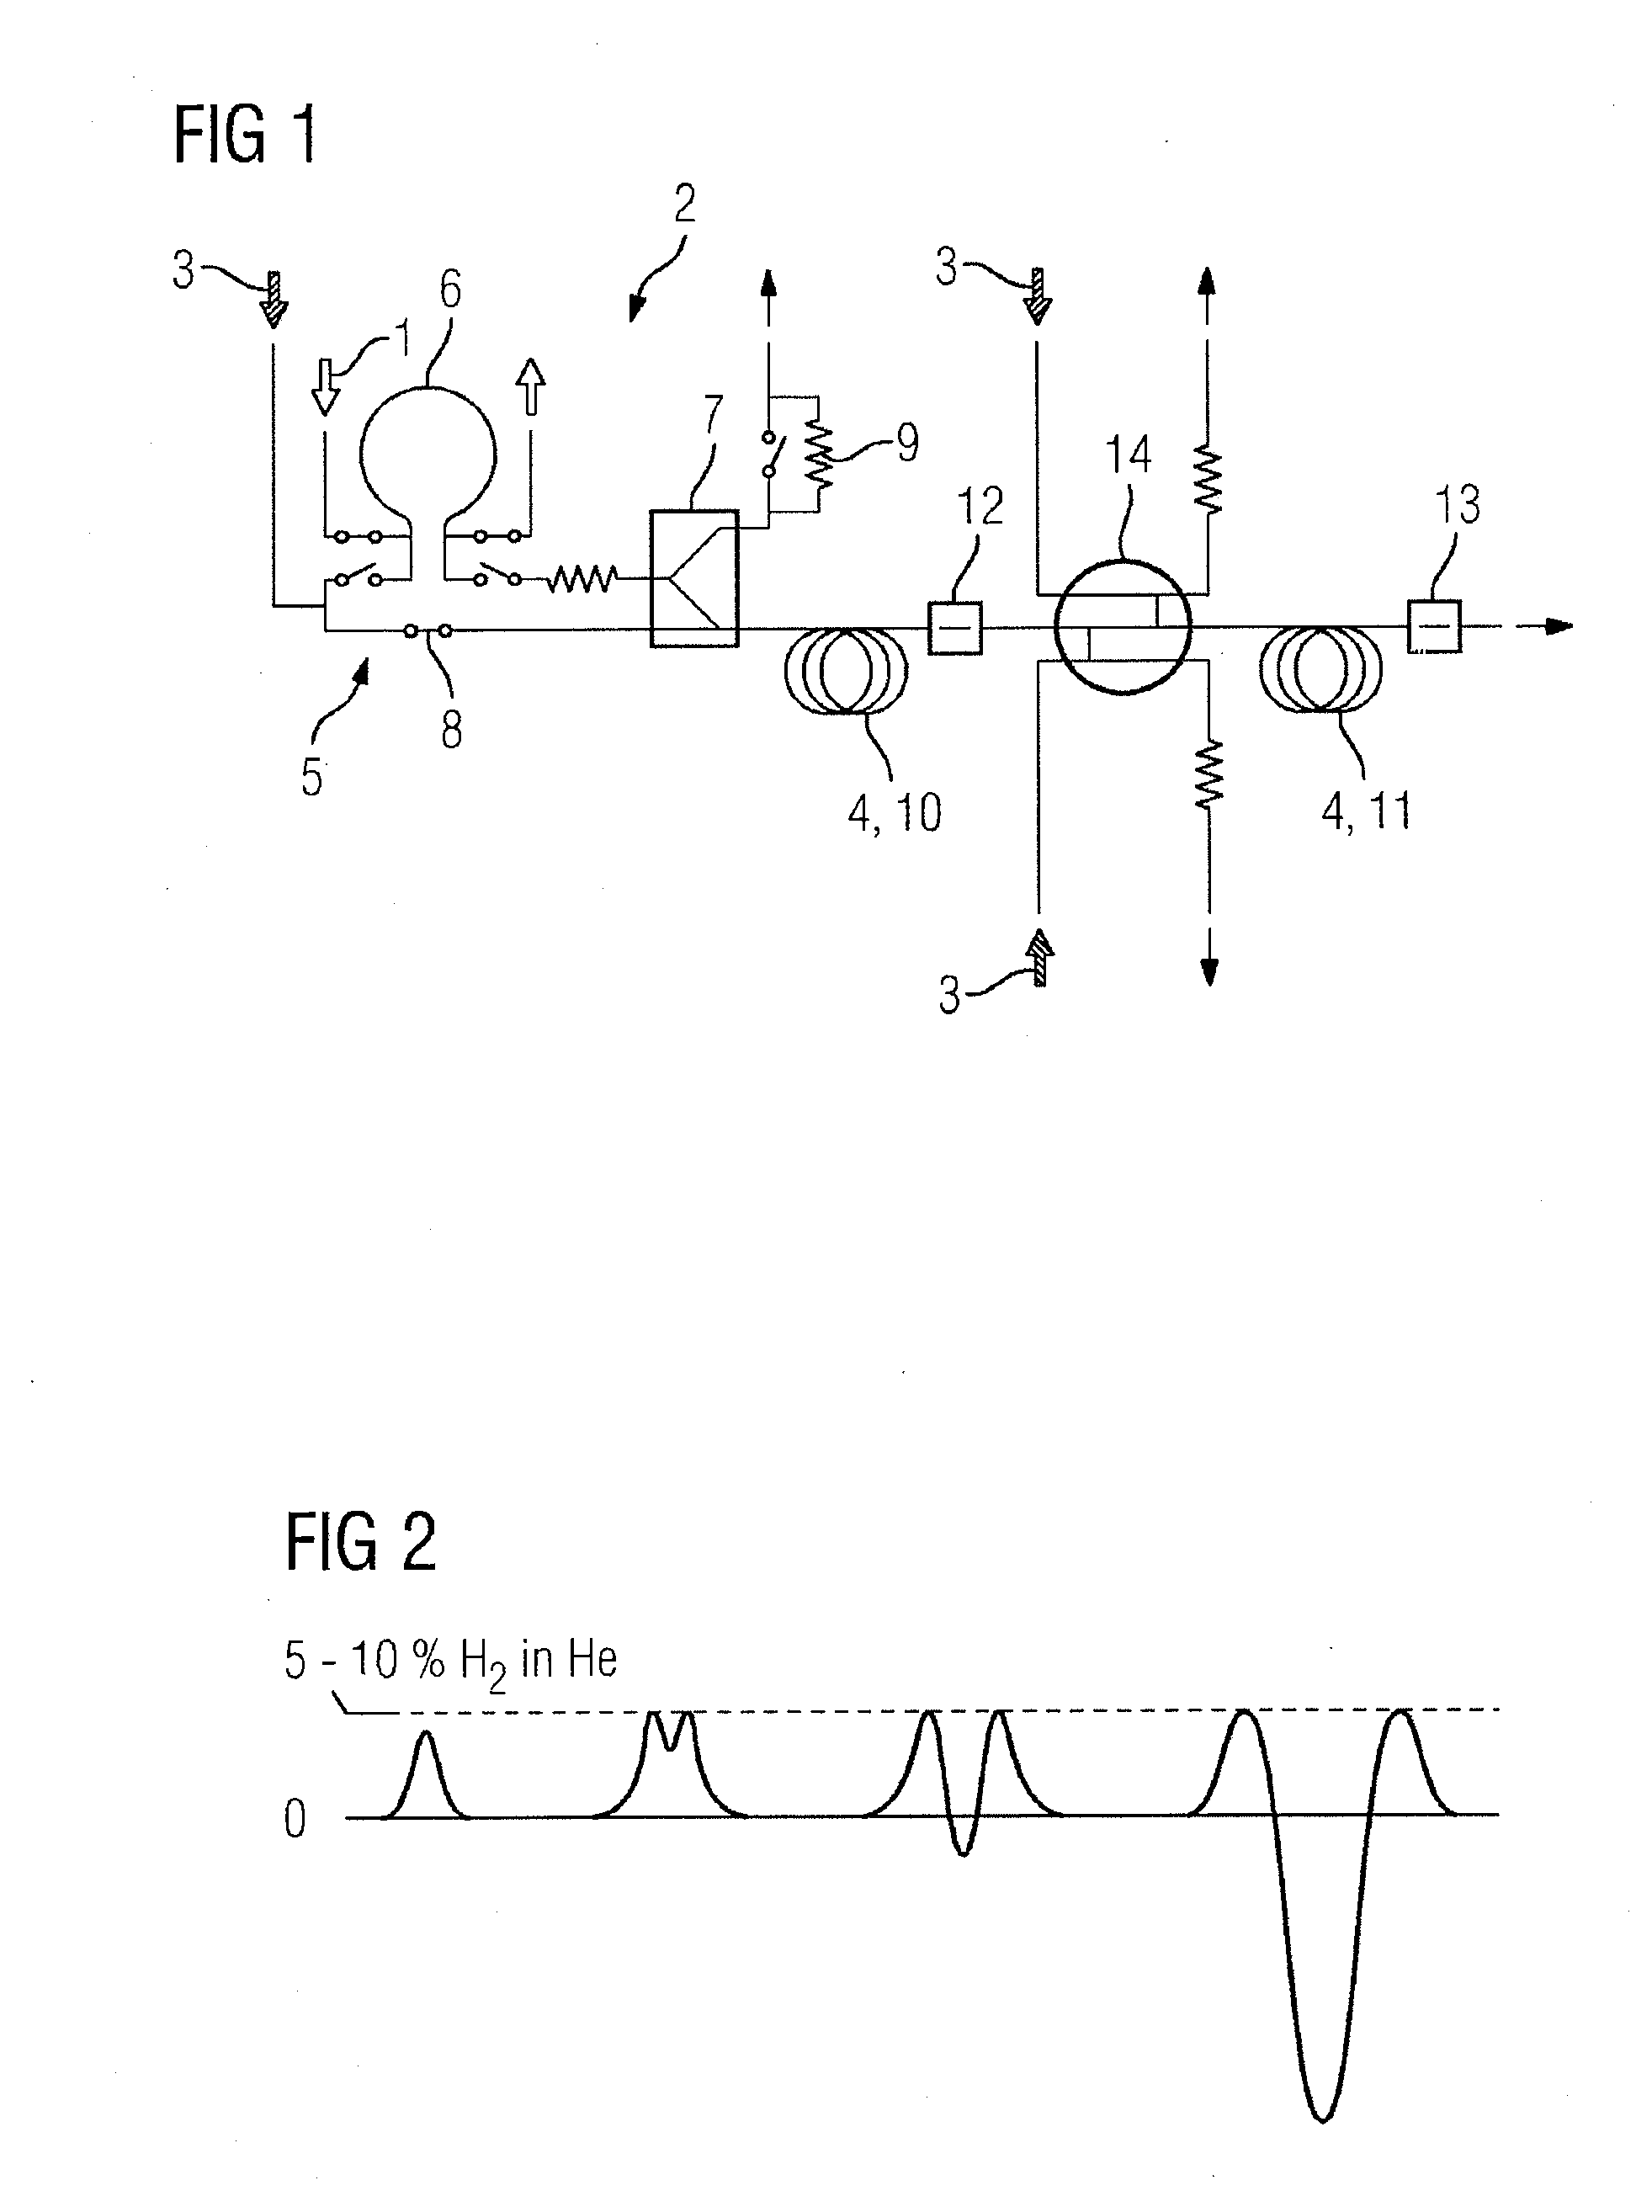 Method for Chromatographic Analysis of a Hydrogen-Containing Gas Mixture